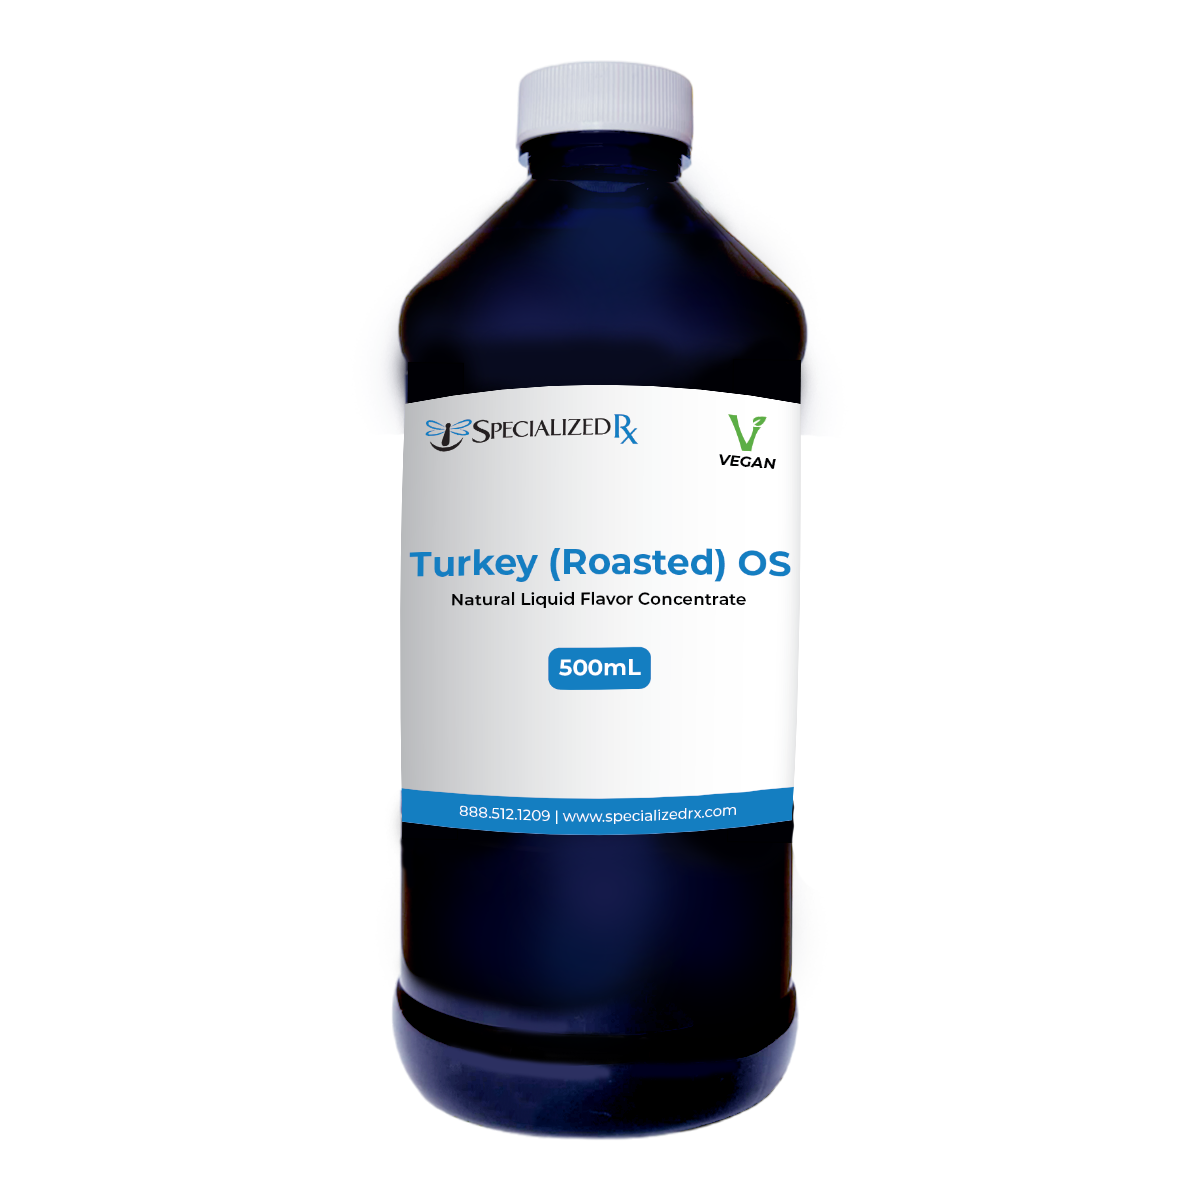 Turkey (Roasted) OS Natural Liquid Flavor Concentrate - Vegan